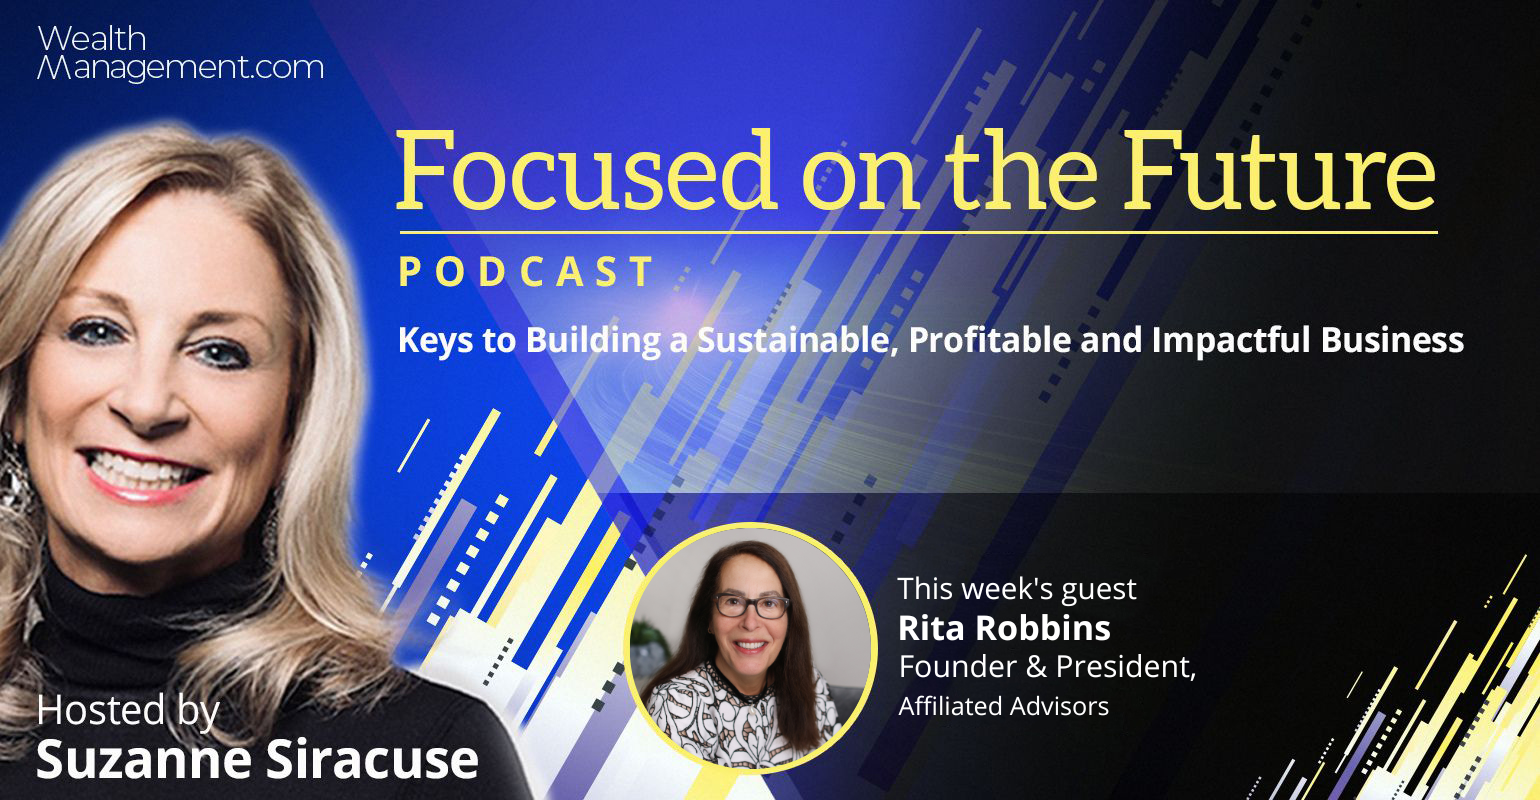 Focused on the Future: Rita Robbins on the Evolution of Women in Finance